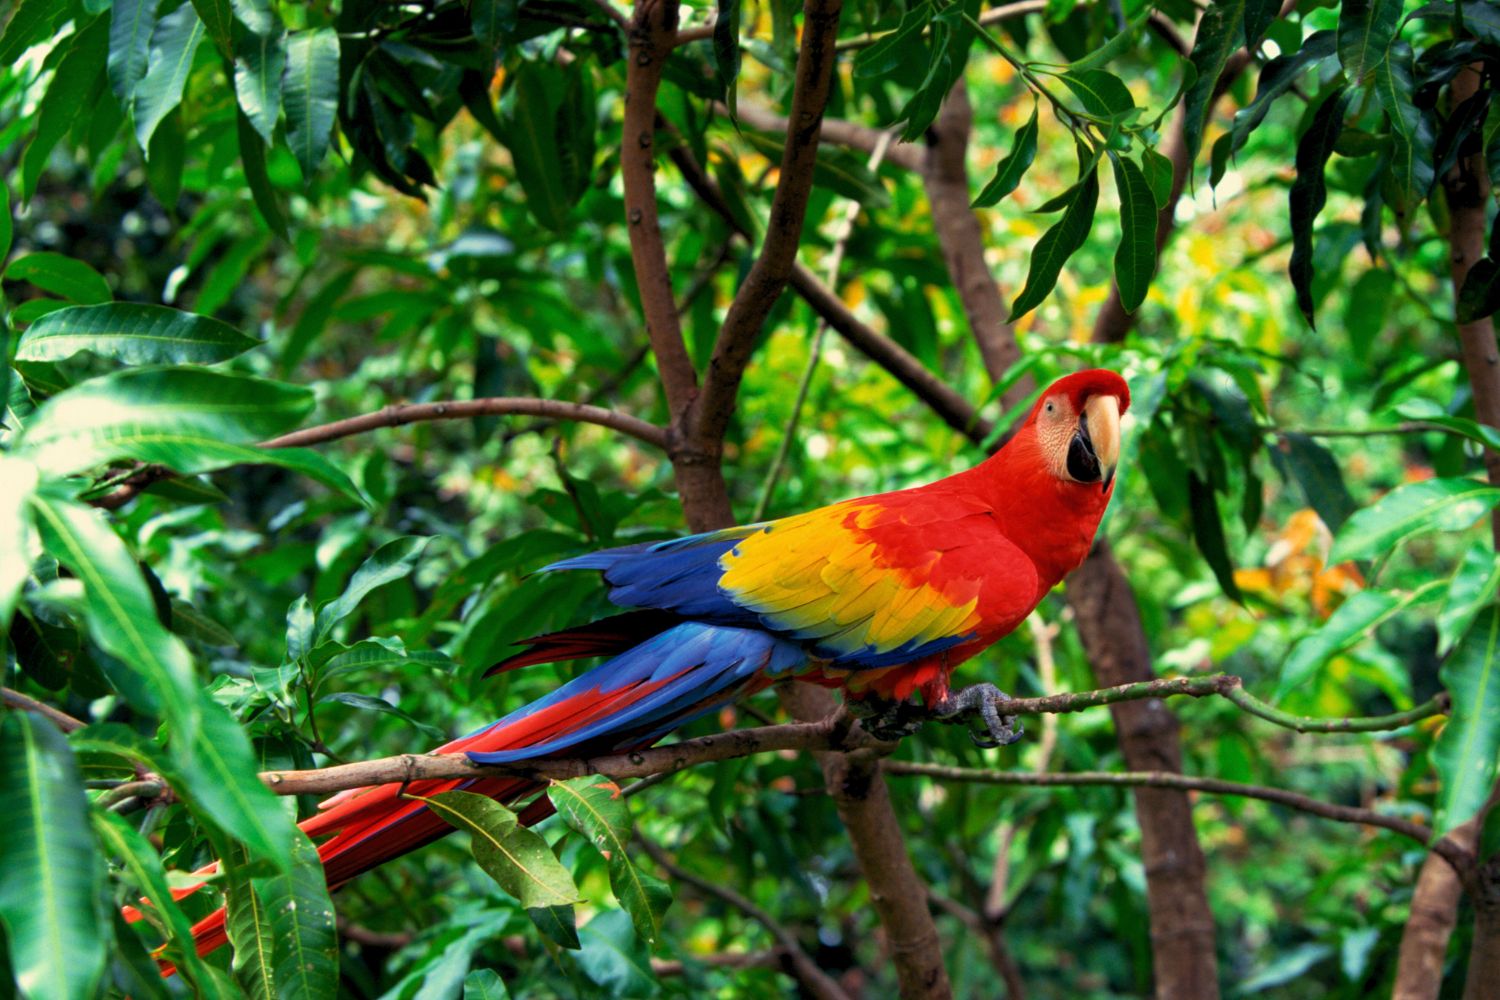 1. Macaws have a beautiful appearance that’s also well adapted to their environment